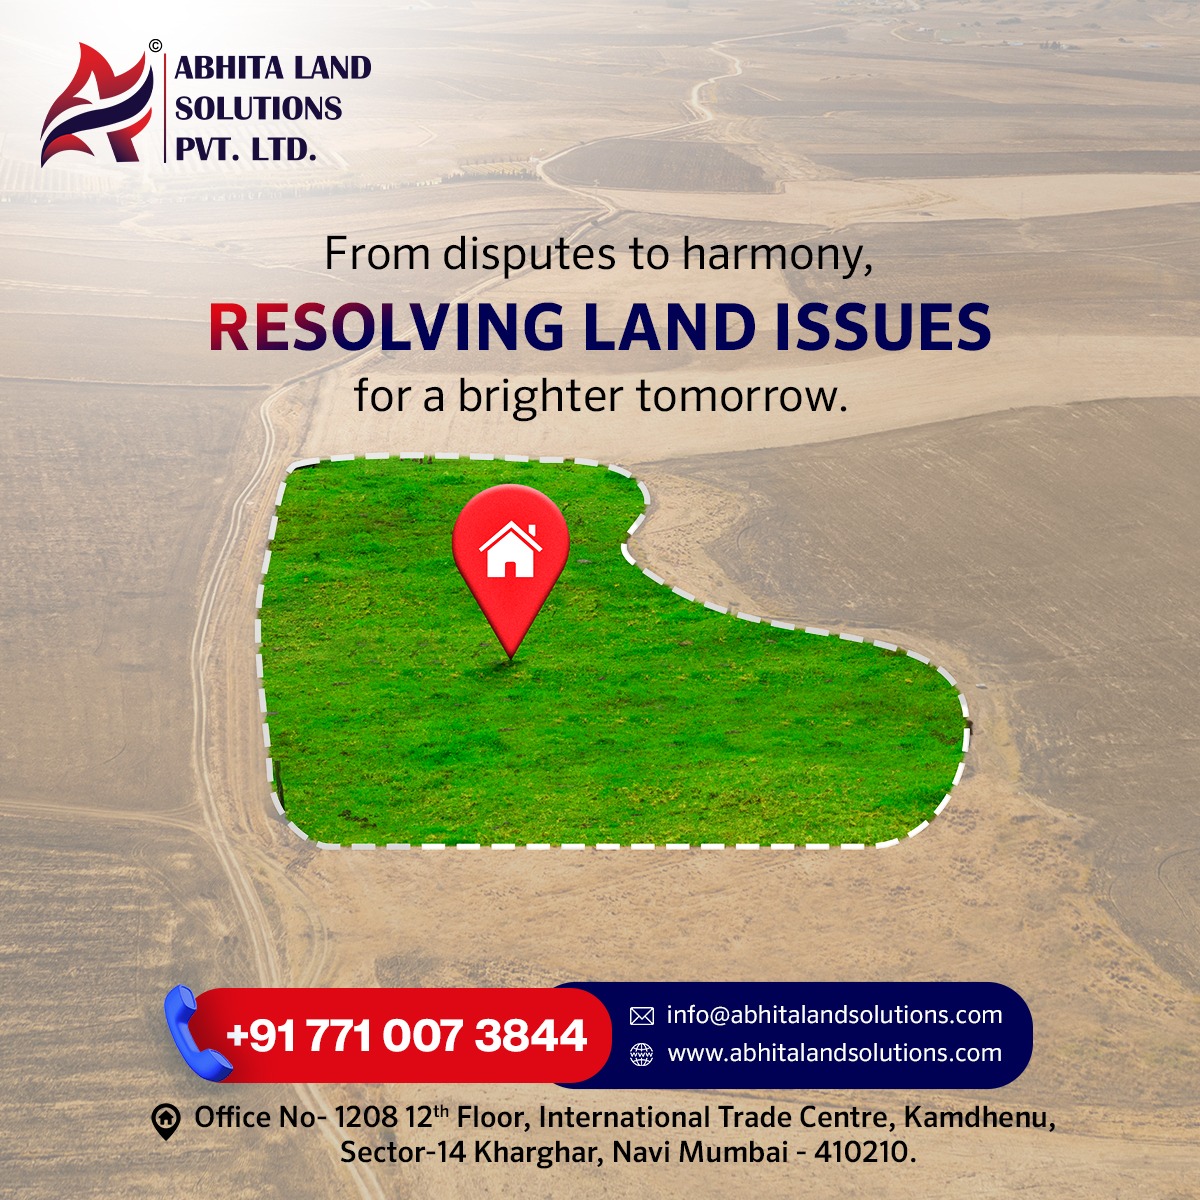 From disputes to harmony, resolve land issues for a brighter tomorrow.

#LandDisputes #LegalGuardians #LandMatters #PropertyRights #LandRights #LegalAdvice #LegalServices #LegalSolutions #LegalAdvocate #landsolution #landservice #LegalExperts #abhitalandsolutions #navimumbai